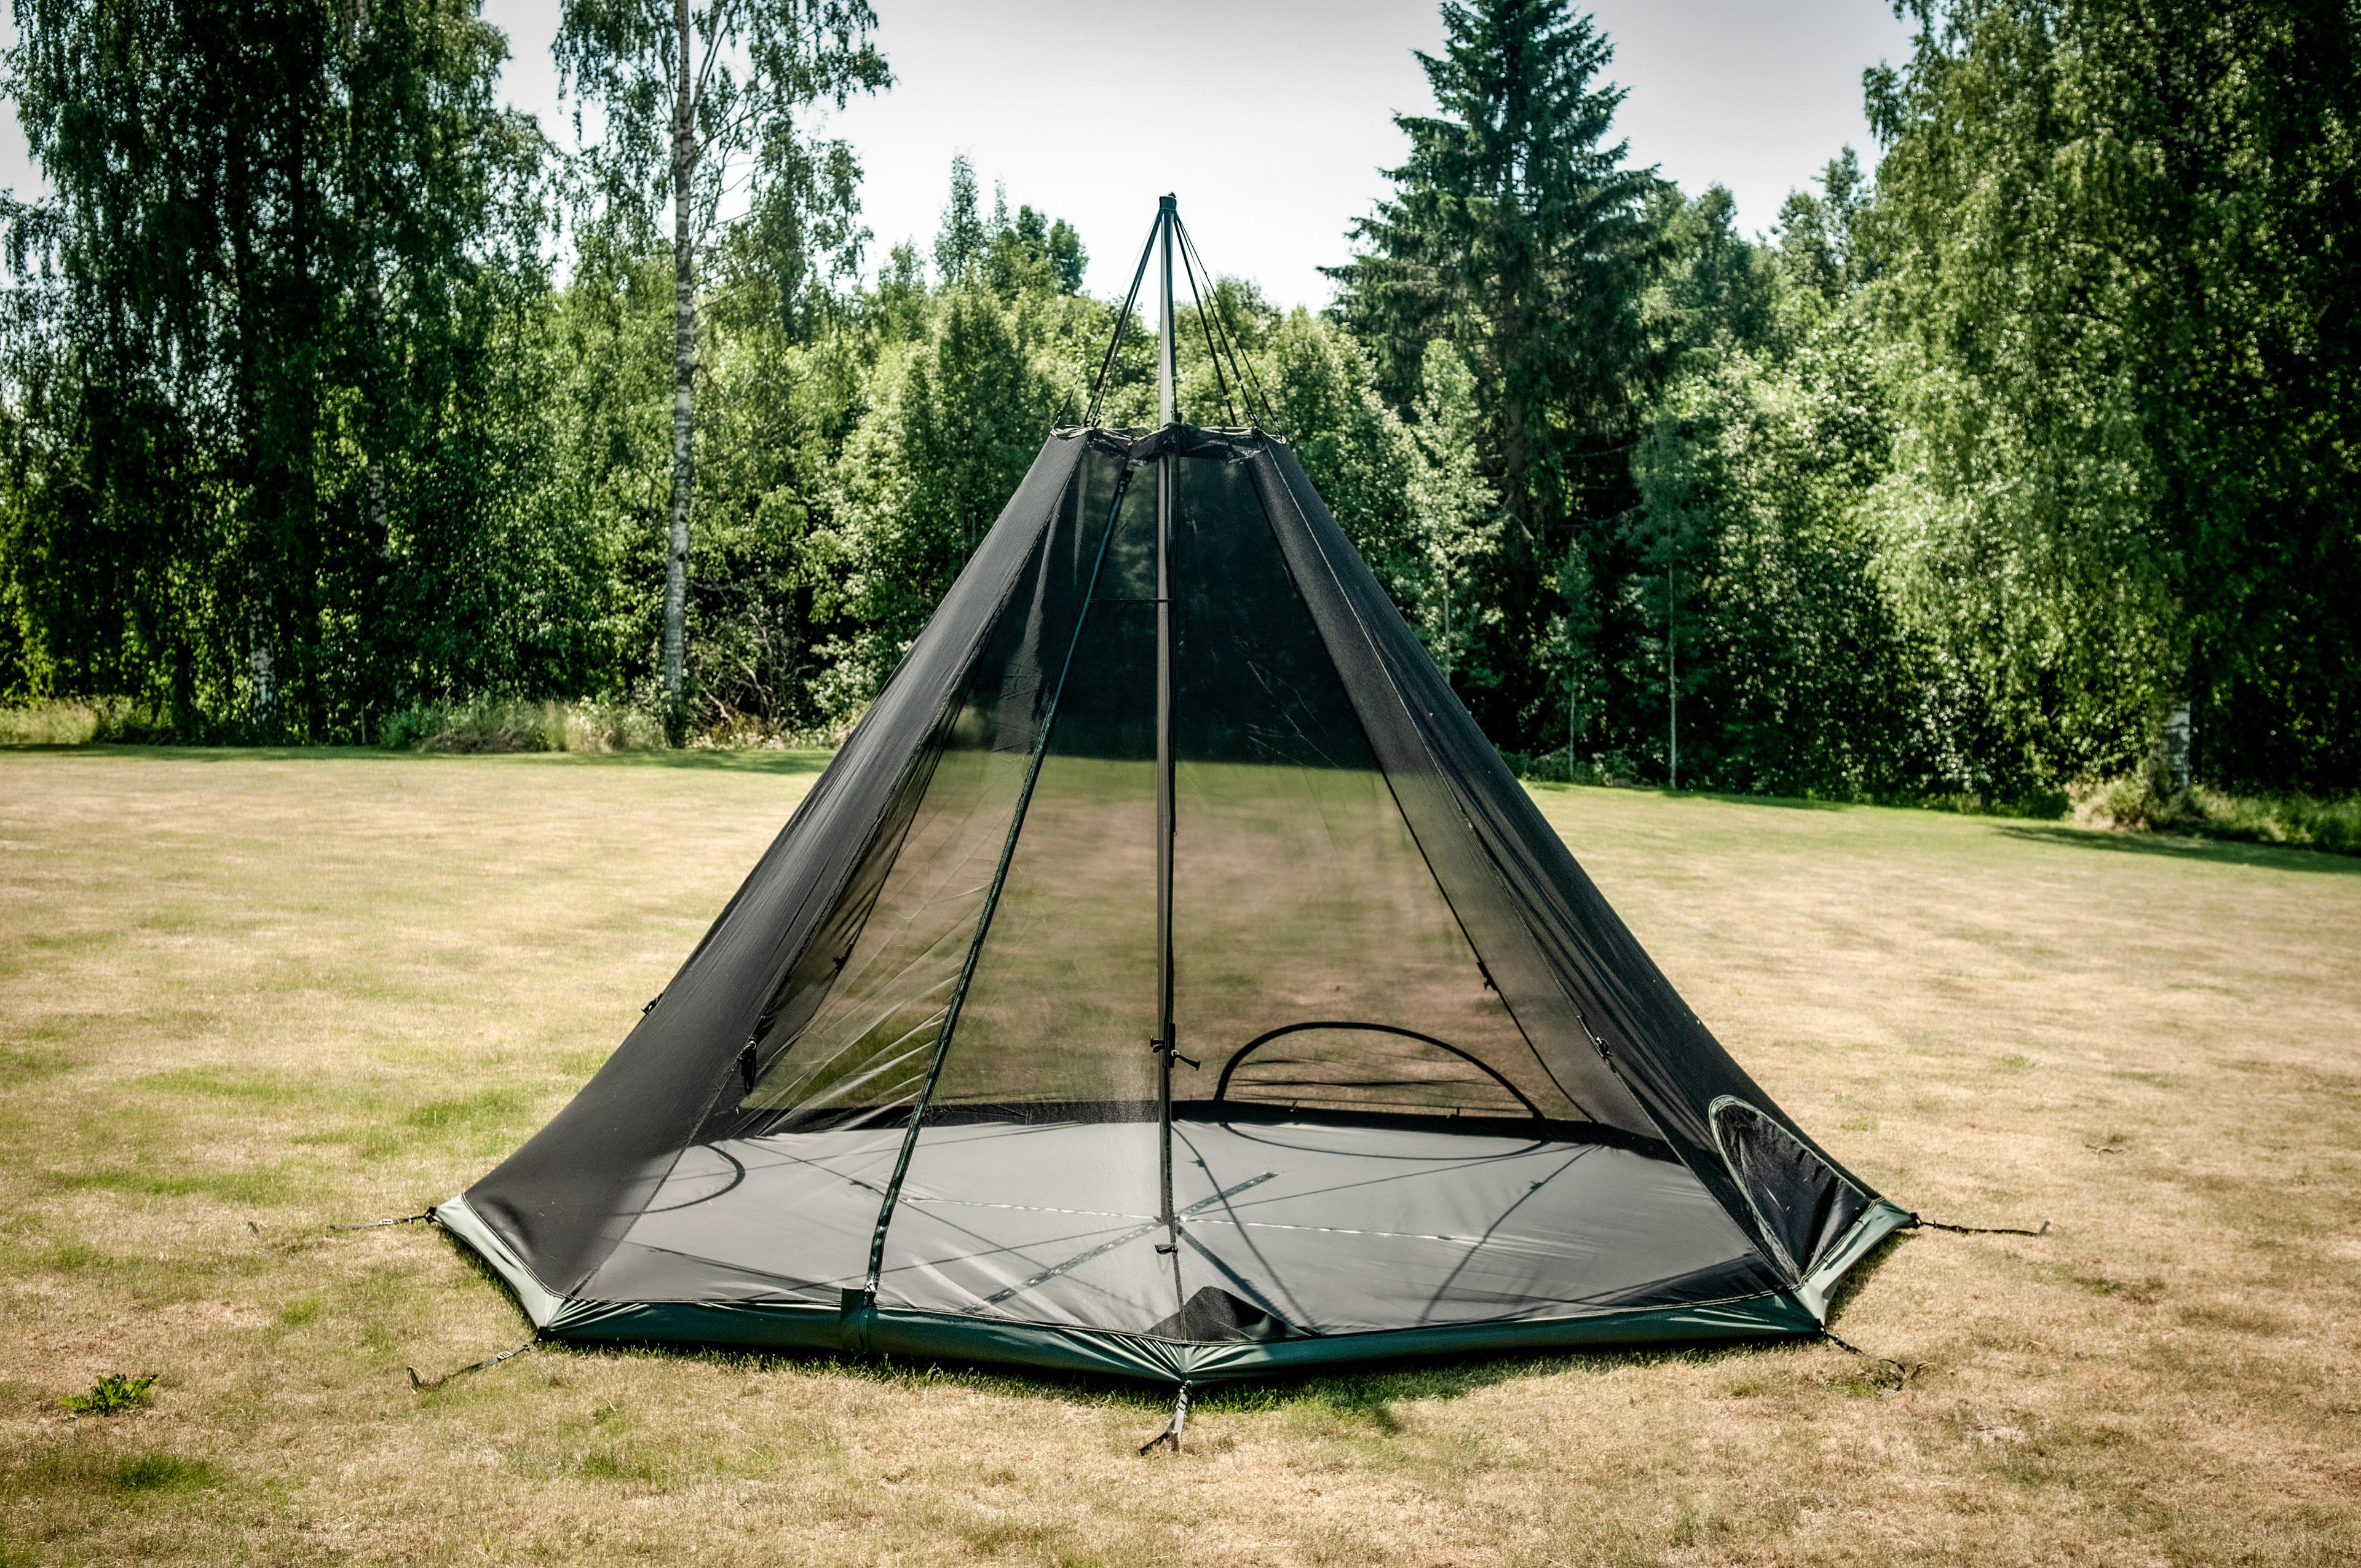 Mesh inner tent stand alone